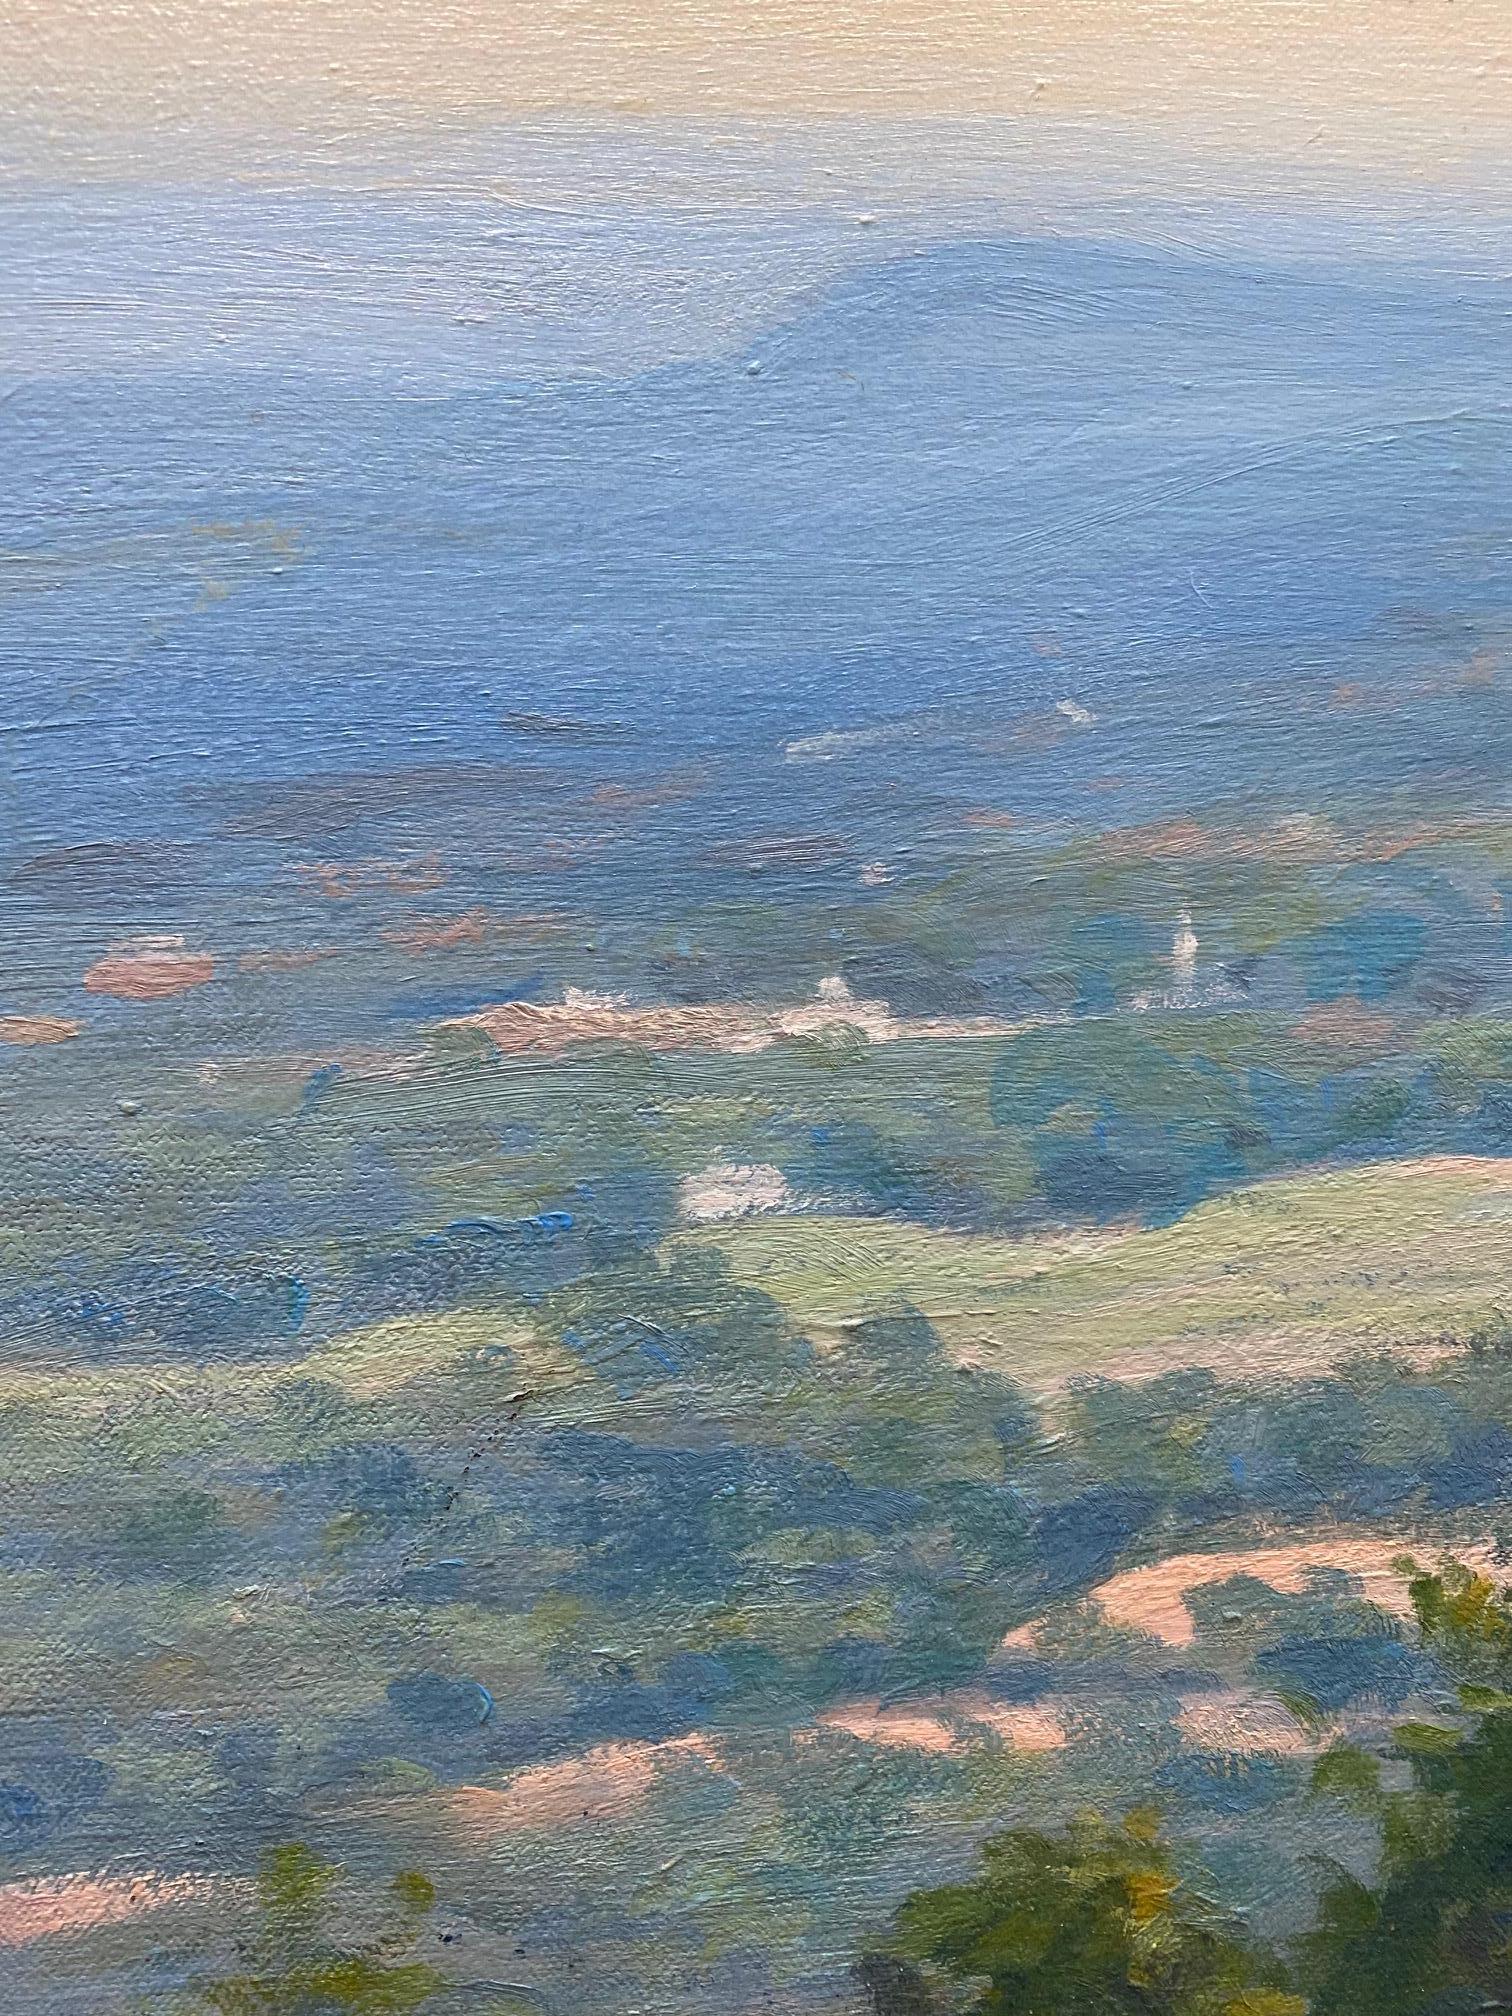 Take a deep breath and stretch your arms and legs, as the tension eases away, one early morning at Highpoint.  This original landscape captures a panoramic view of God's country meticulously executed by Hudson River artist Gerald Lopato.  A veteran